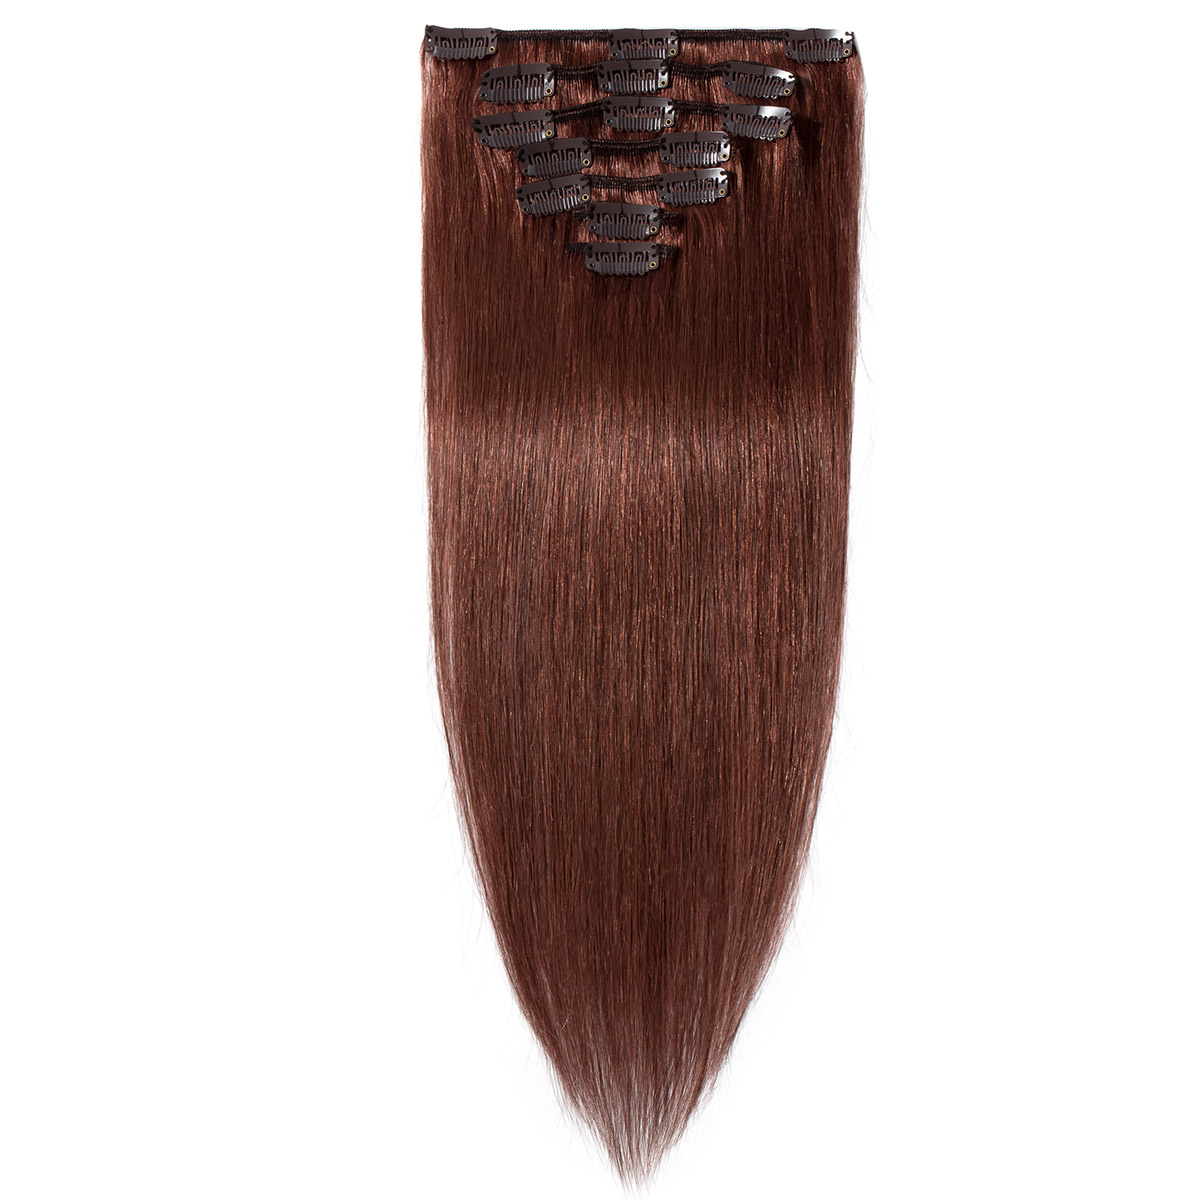 S-noilite 100% Remy Human Hair Clip in Human Hair Extensions Silky Straight Human Hair 7 Pcs 15 clips - image 1 of 6